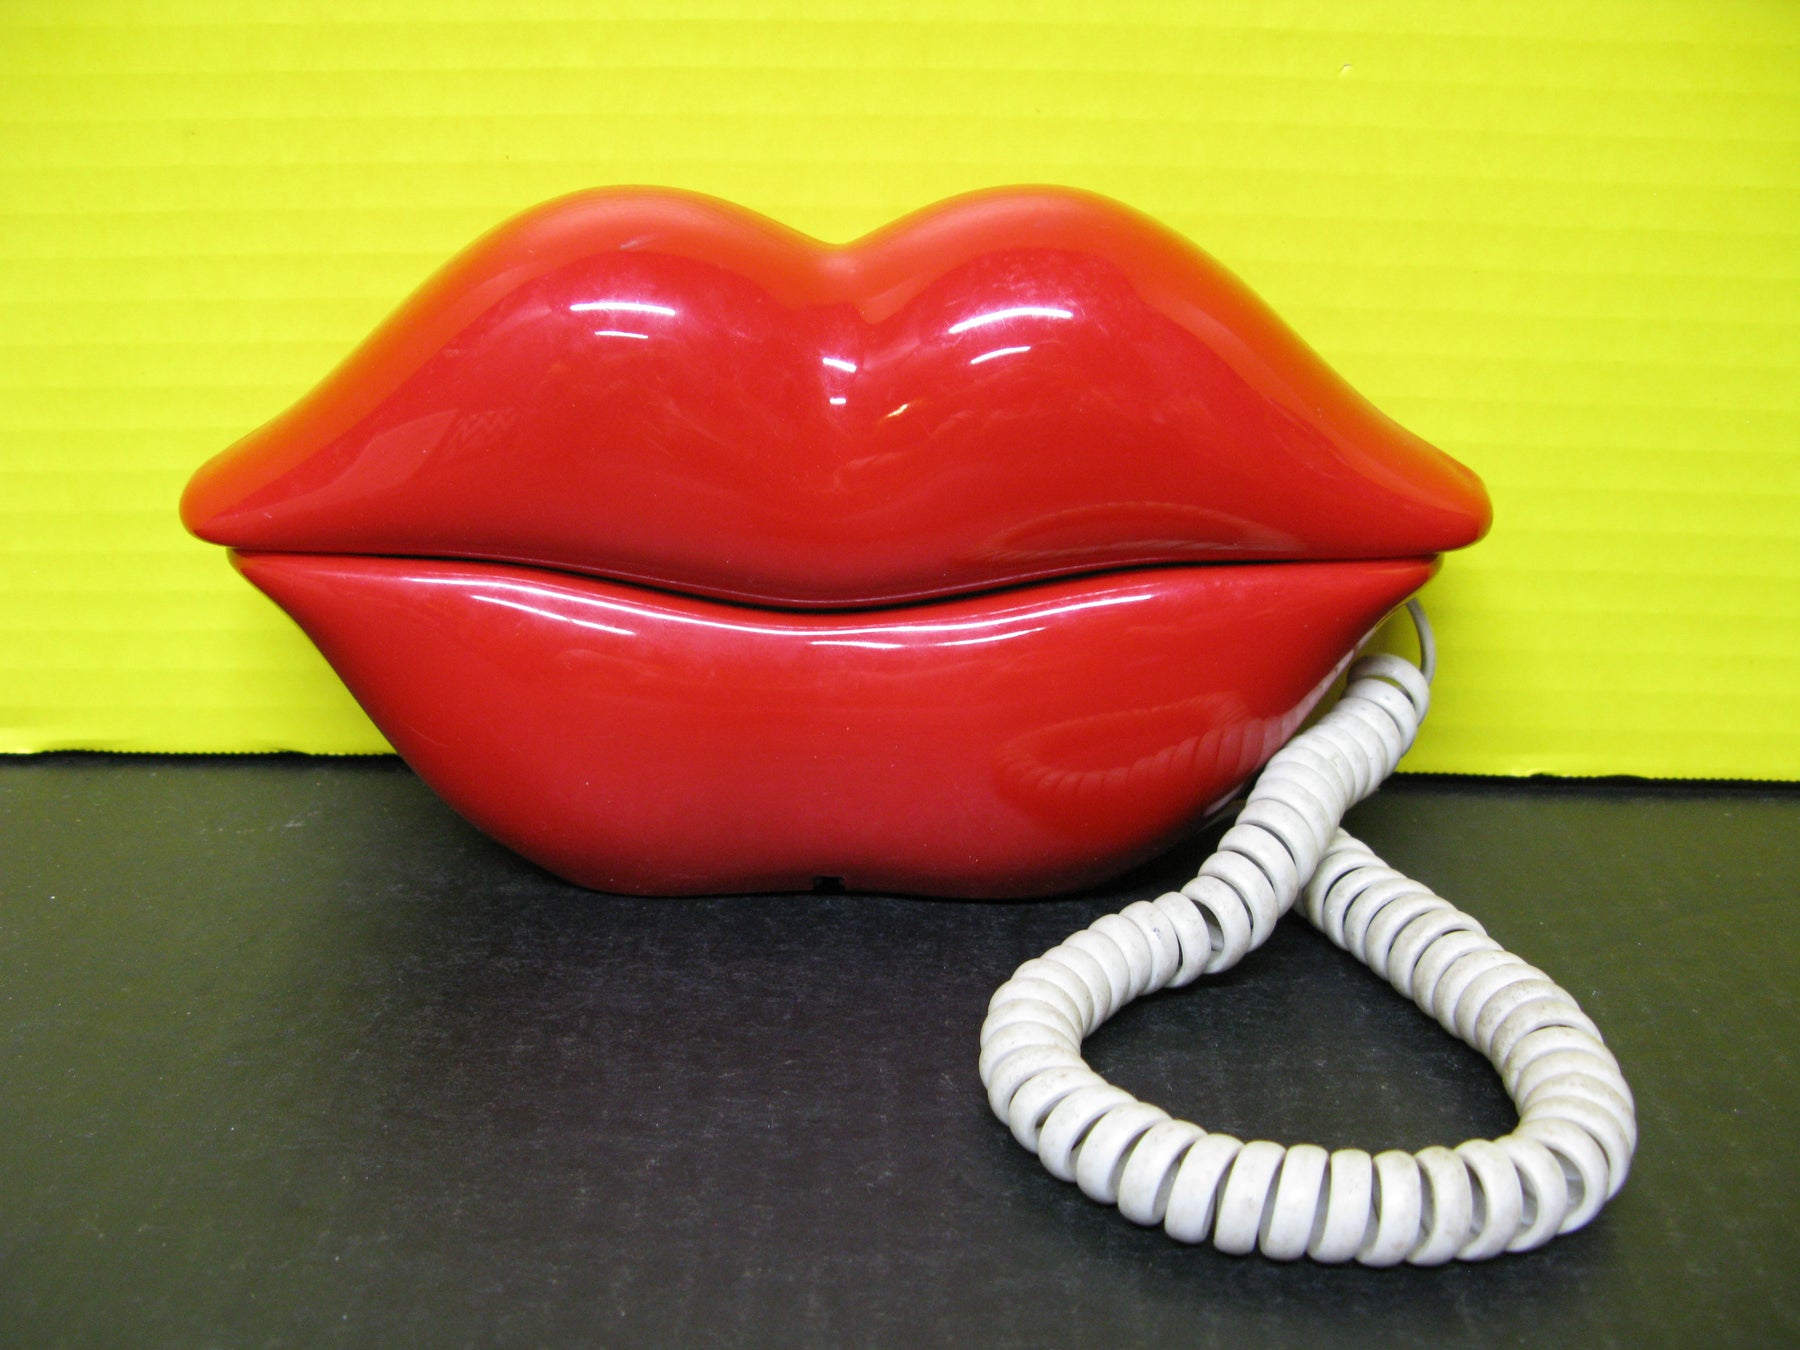 Vintage Red Lips Telephone